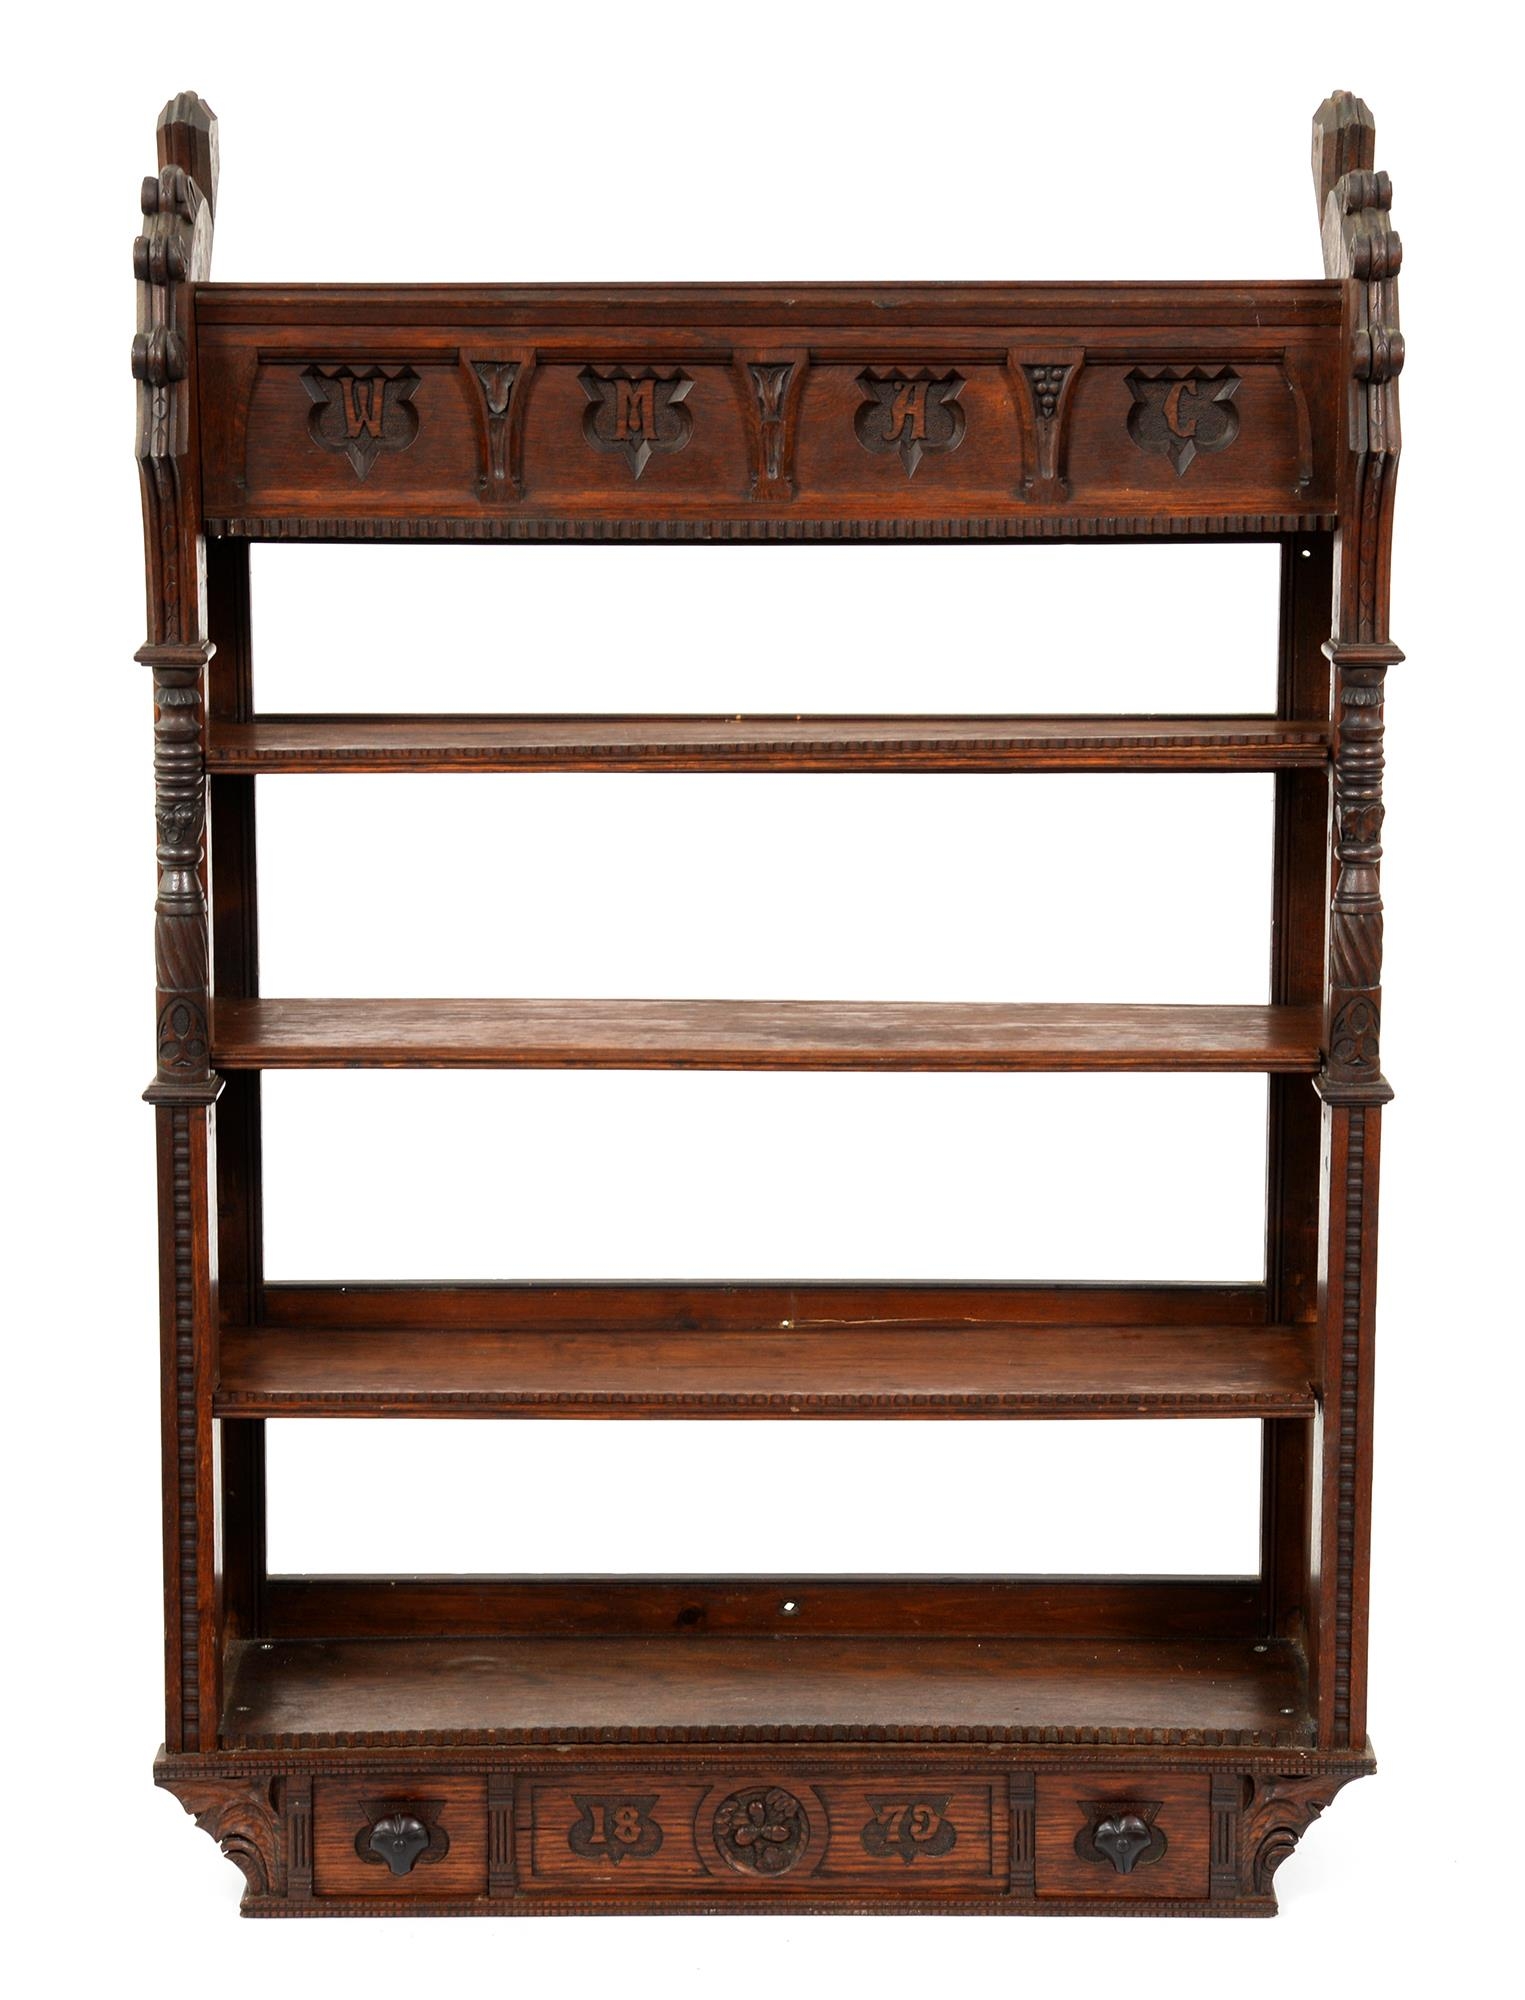 A Victorian reformed gothic oak hanging bookcase, the frieze carved with initials W M A C, the